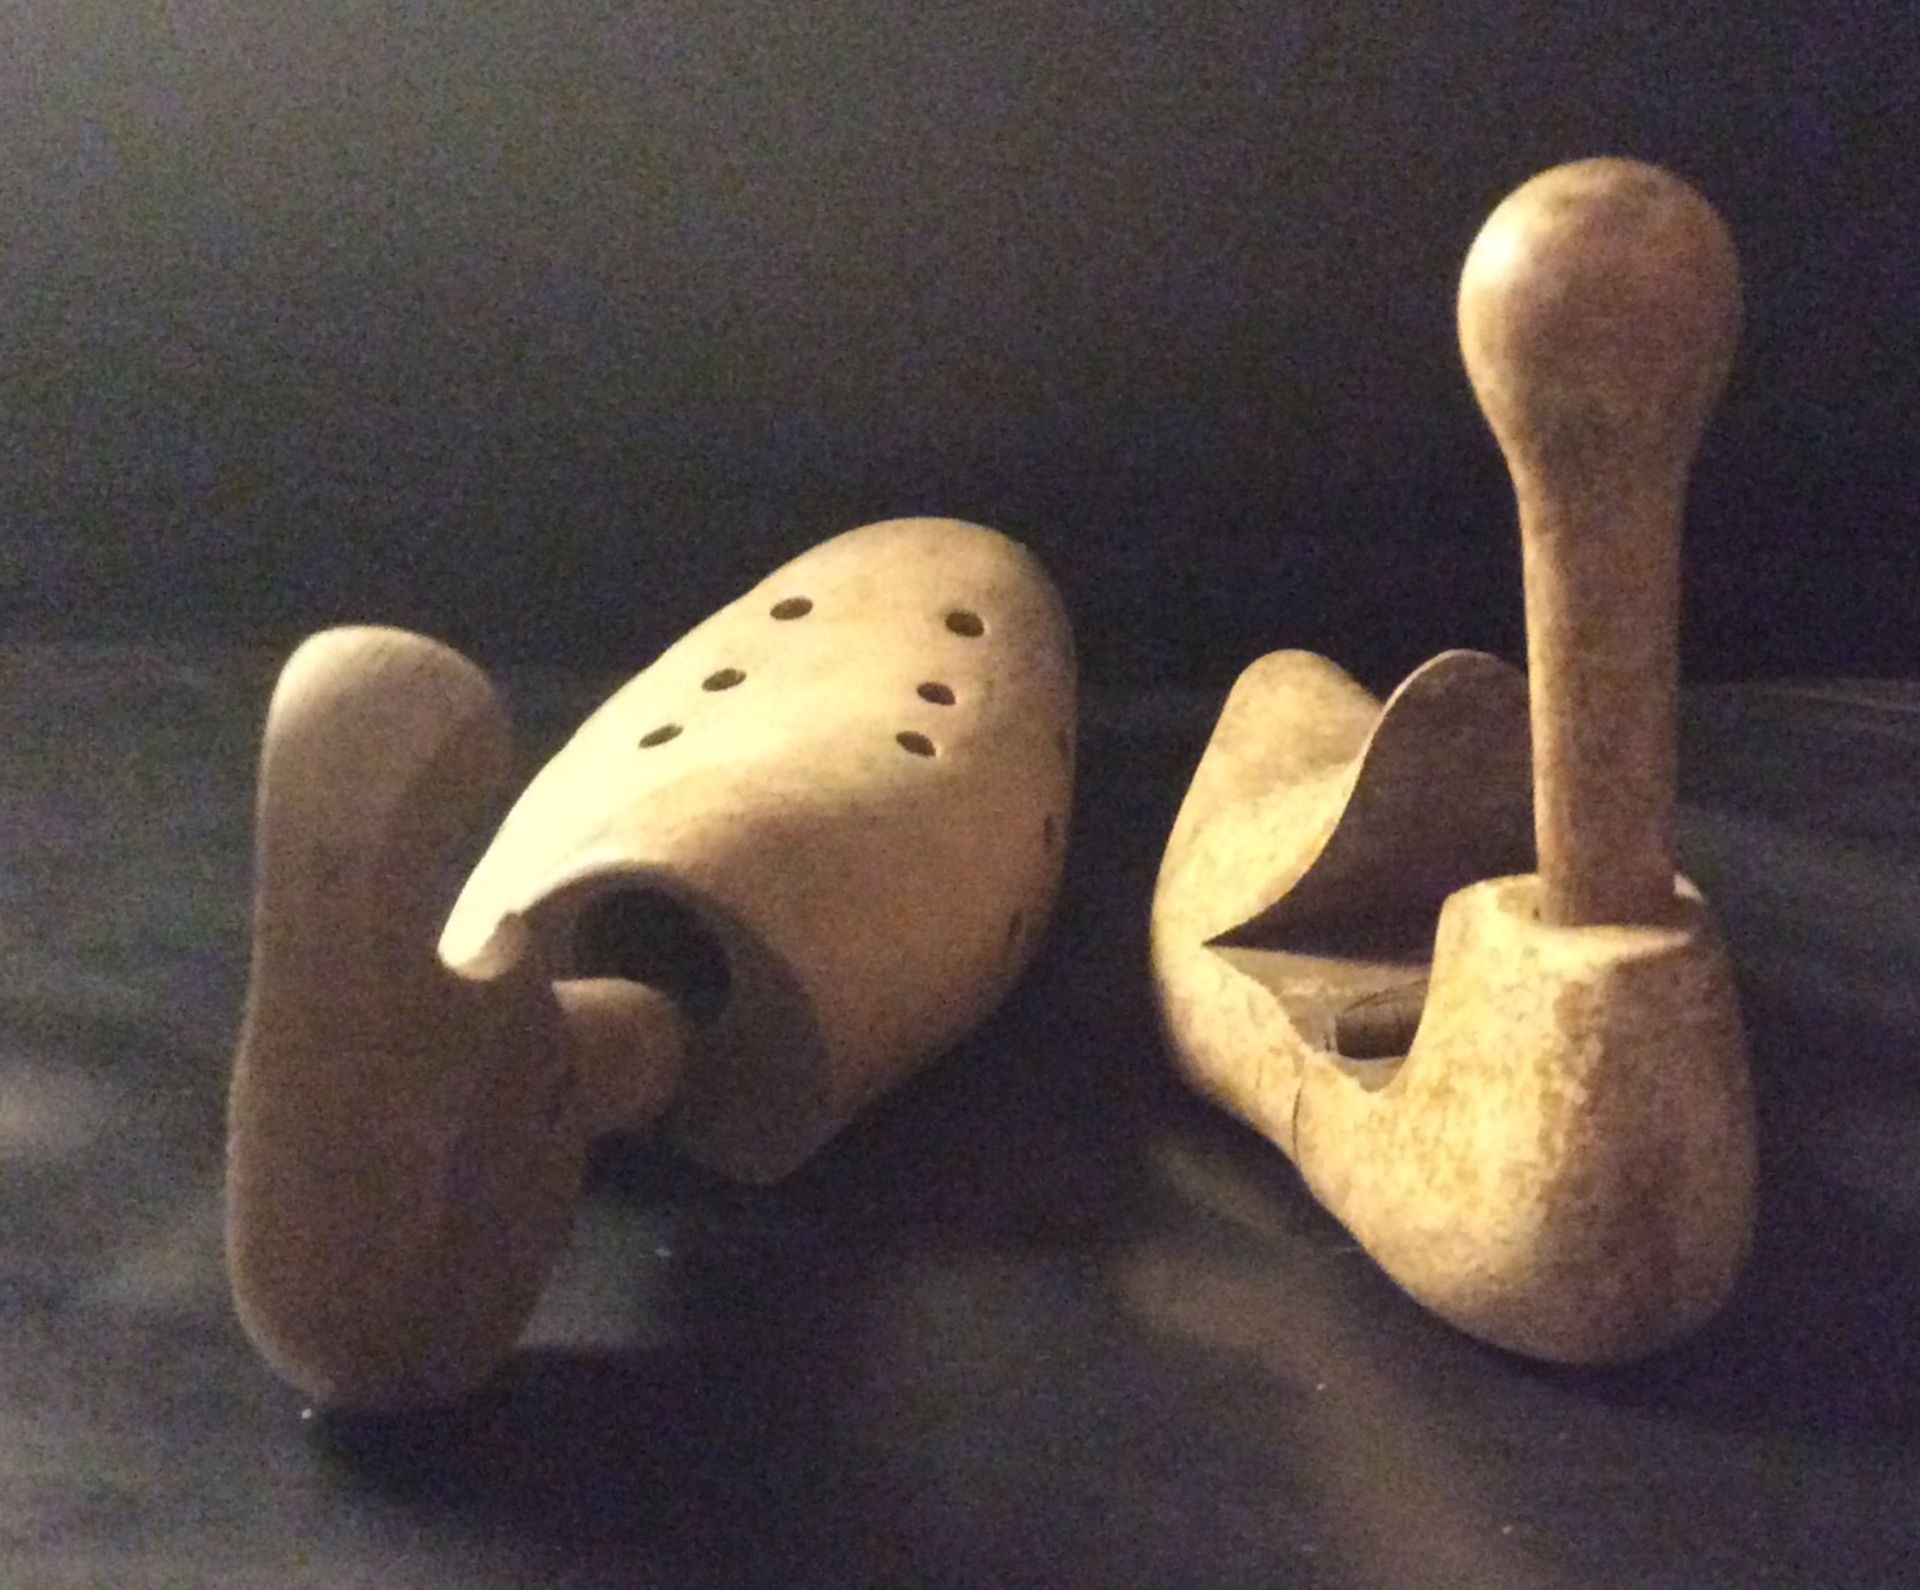 Pair of antique/vintage wooden shoe lasts - Image 2 of 3